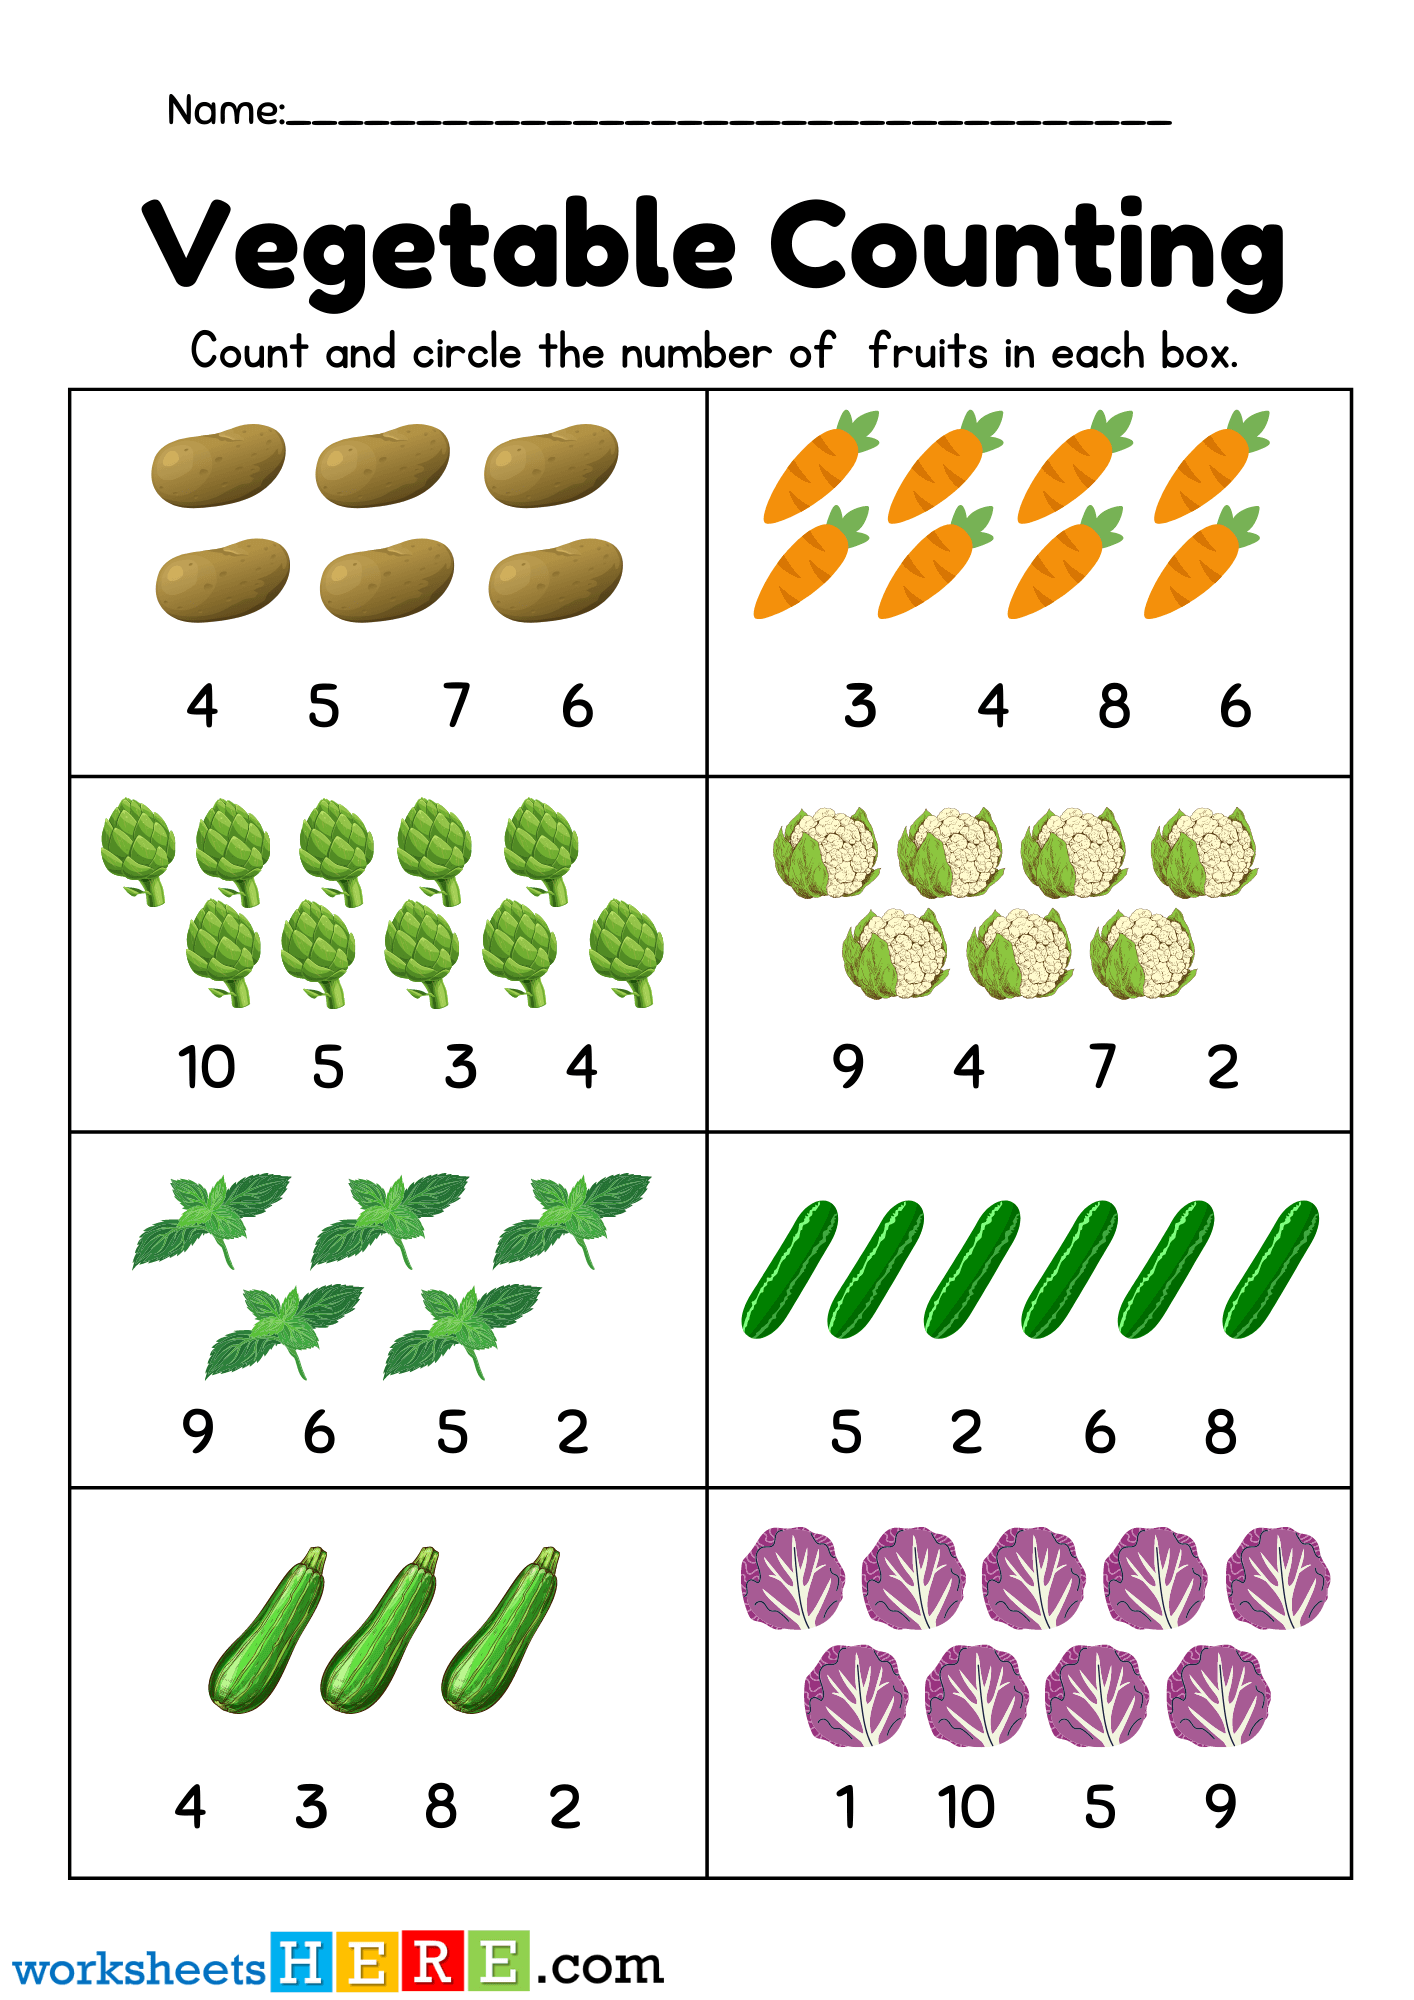 Vegetables Counting, Count and Circle the Number of Vegetables PDF Worksheet For Kindergarten